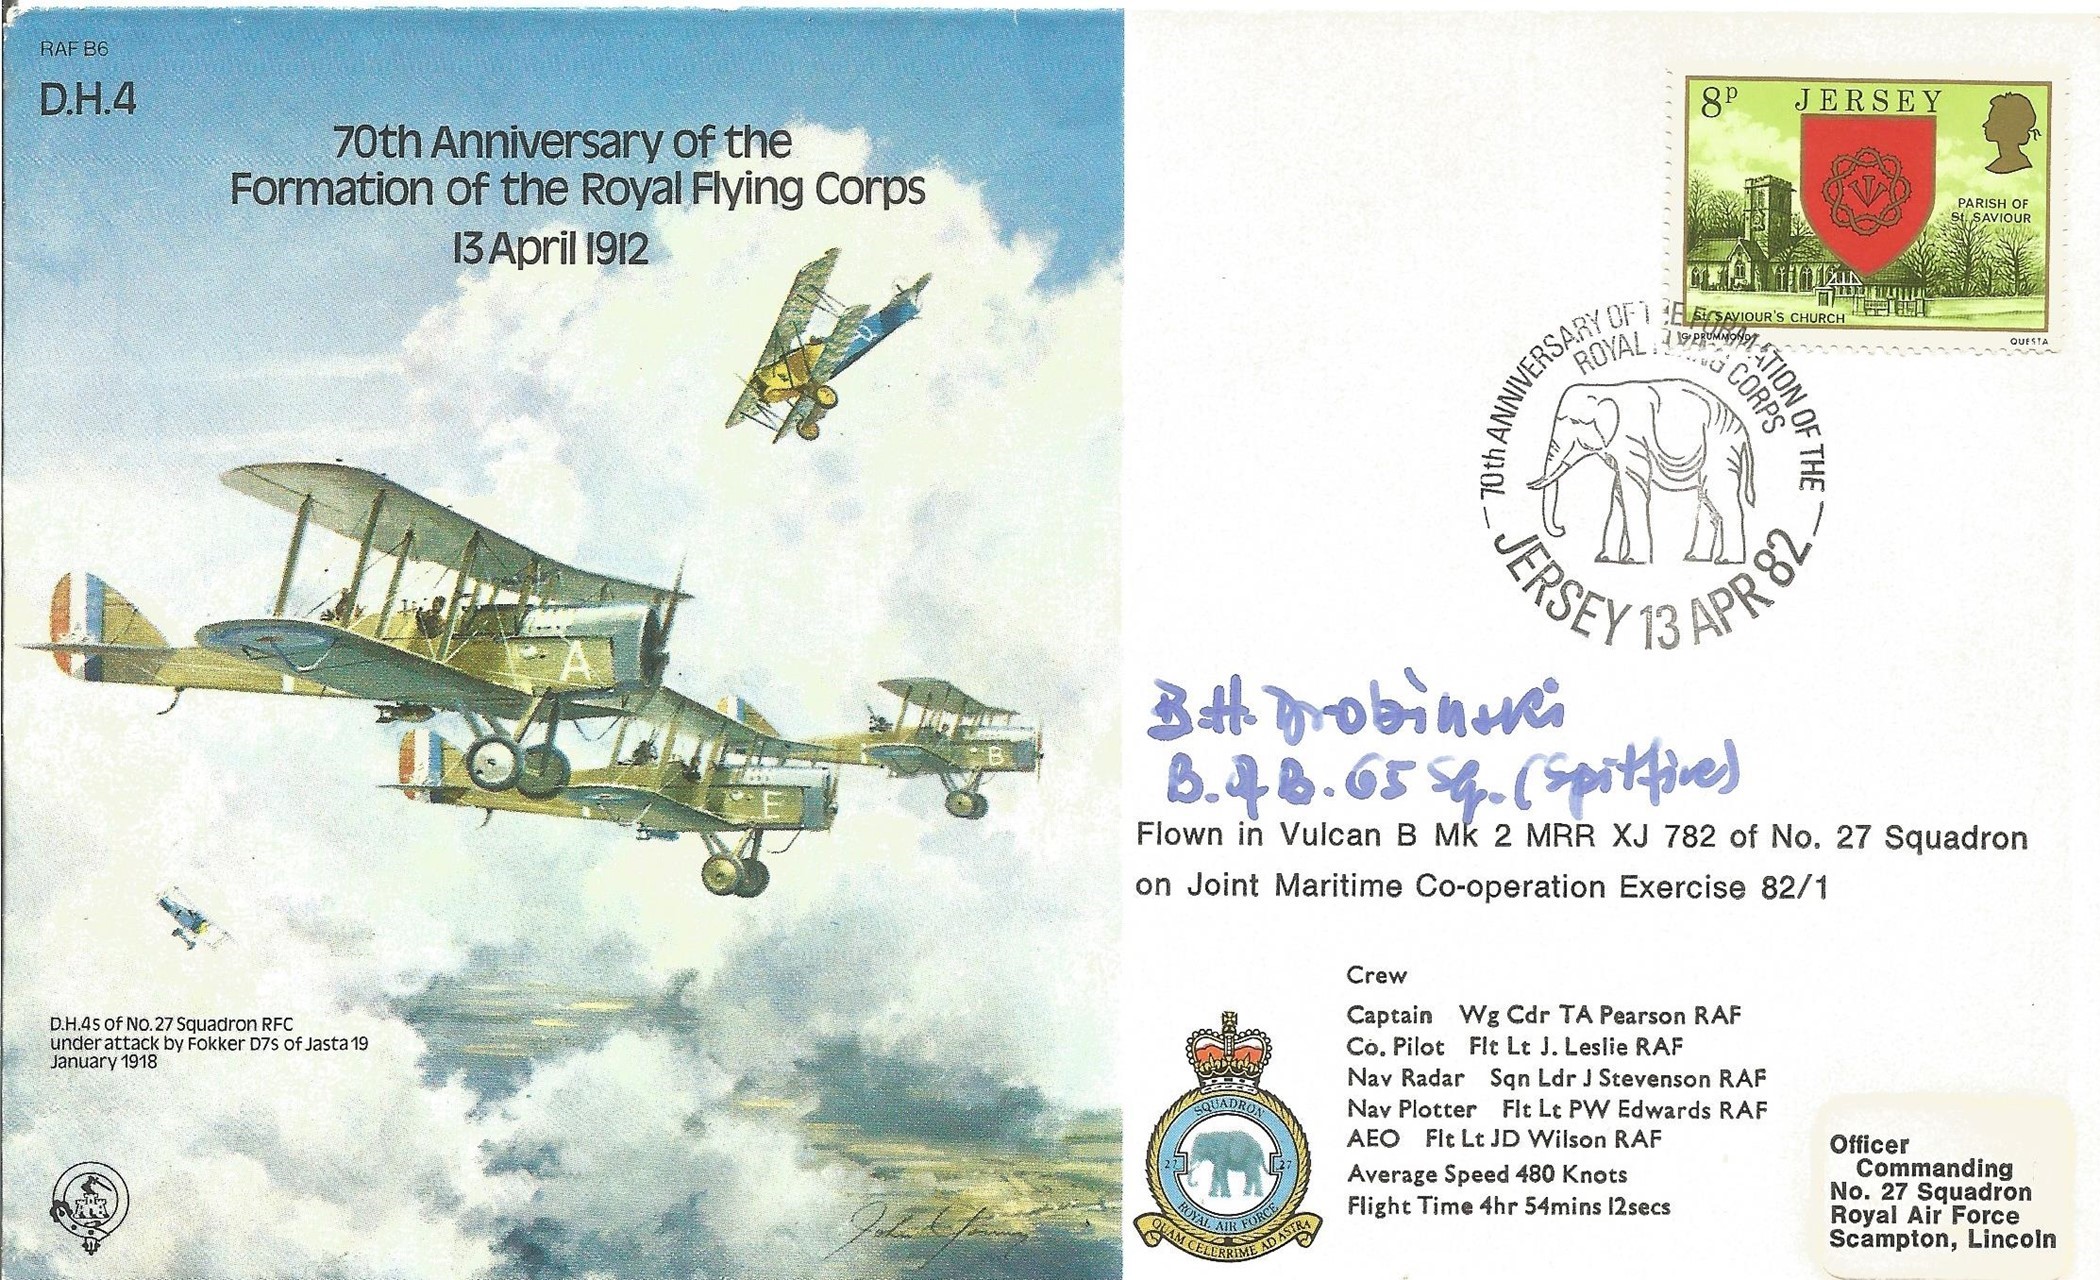 B6 Formation of the Royal Flying Corps Signed Sqn. Ldr. B. H. Drobinski Polish Battle of Britain